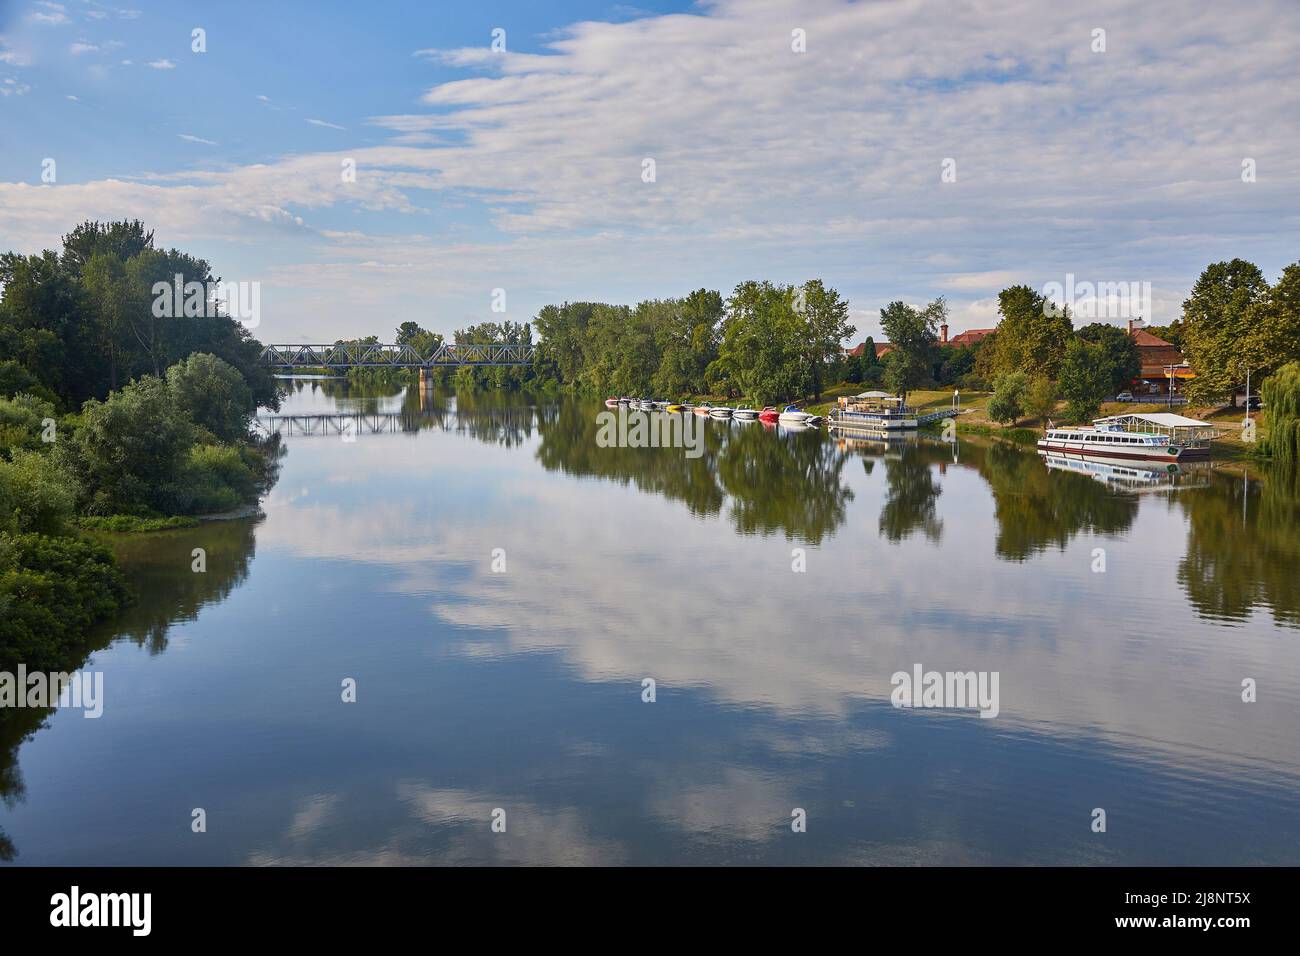 Peaceful waters of rivers, summer landscape Stock Photo